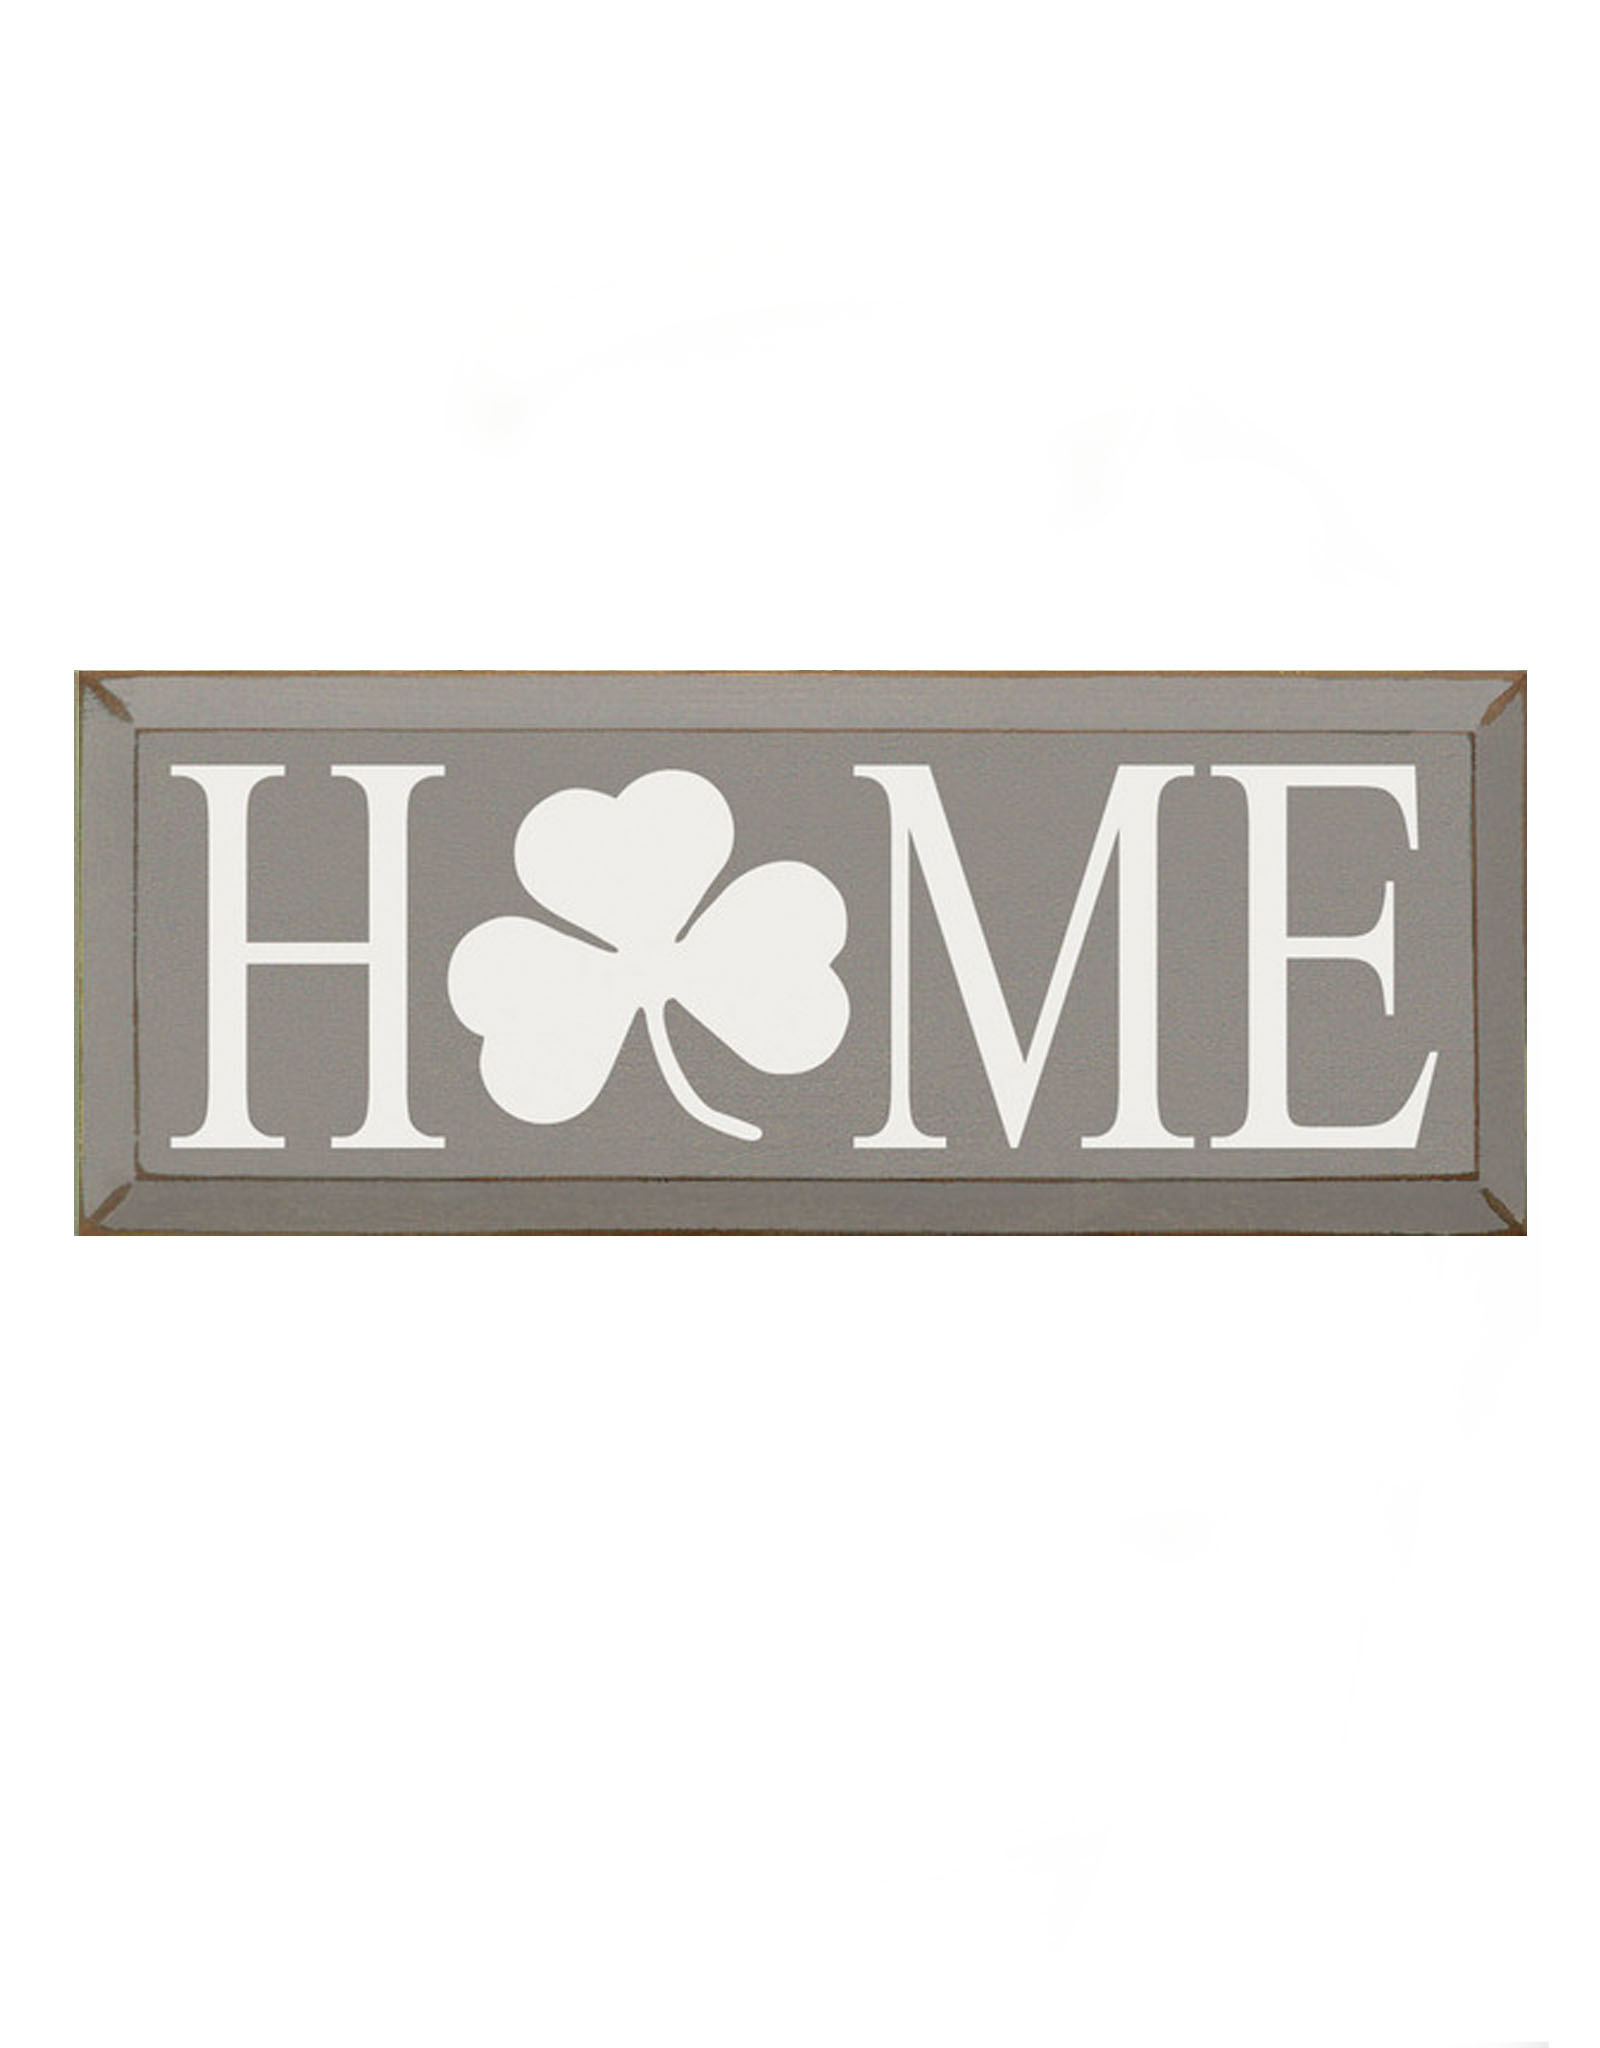 PLAQUES, SIGNS & POSTERS HOME SIGN w SHAMROCK - Grey